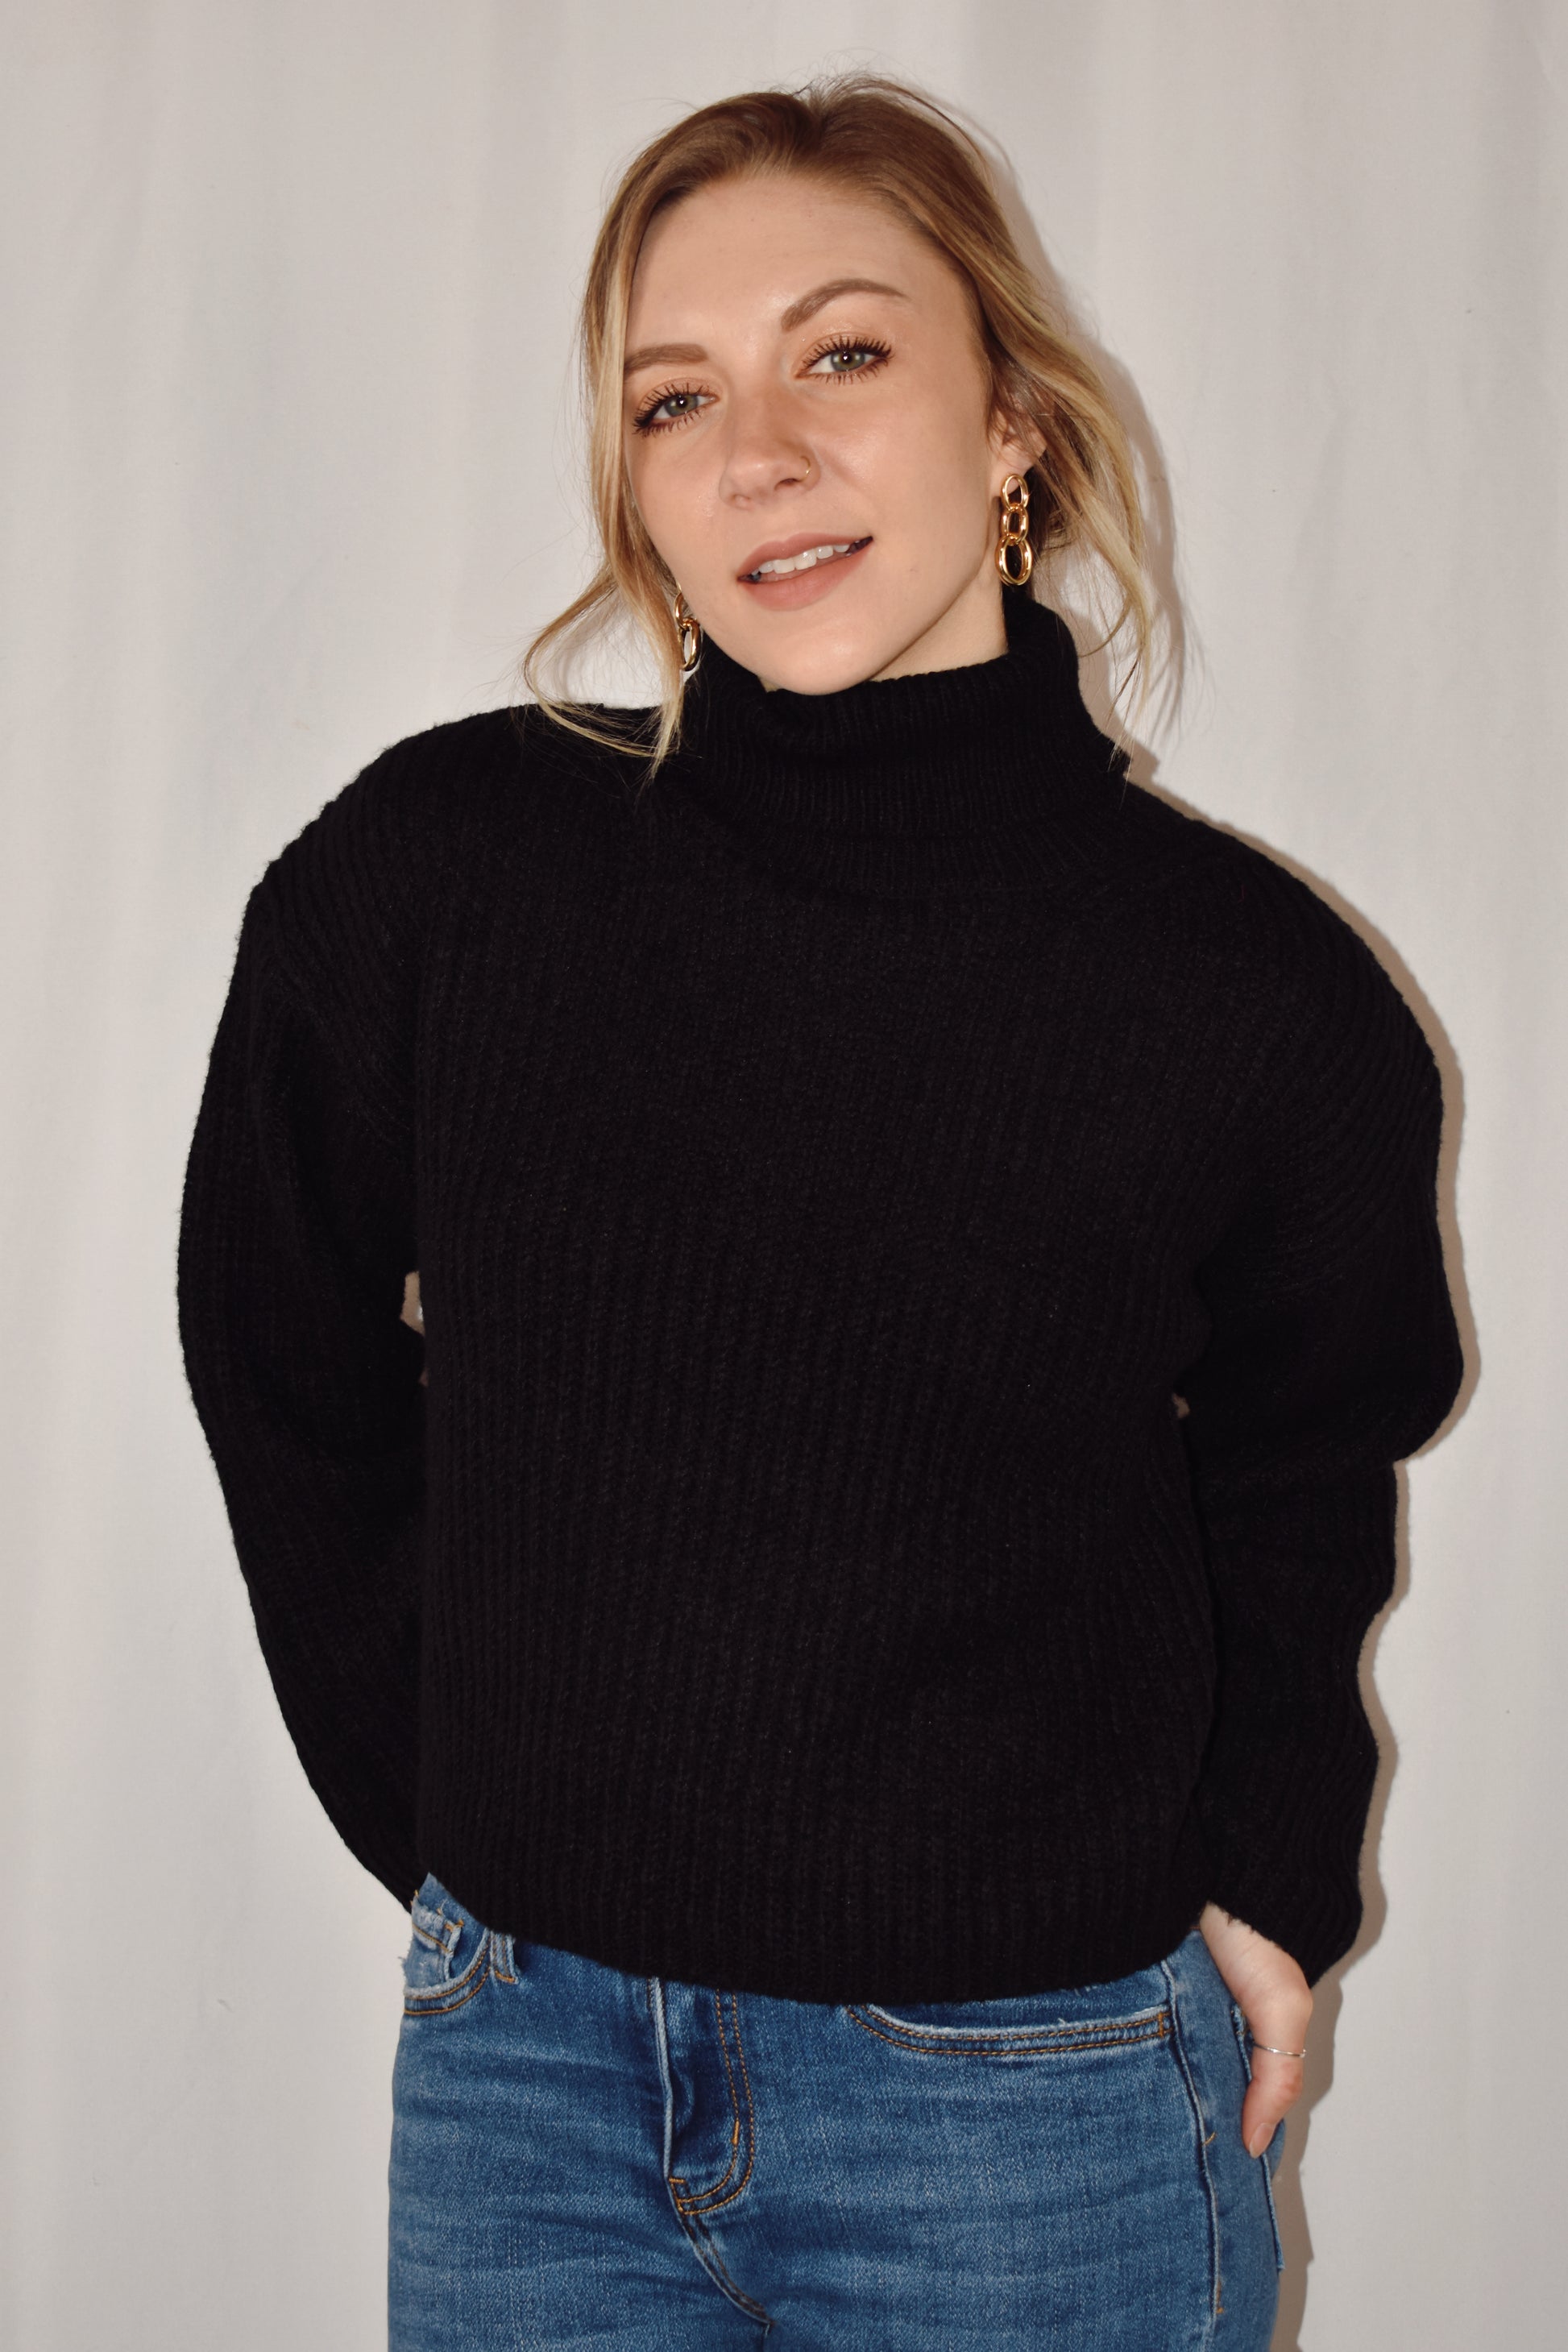 thick turtleneck semi cropped sweater with loose fit and drop shoulder design. loose fitting sleeves.